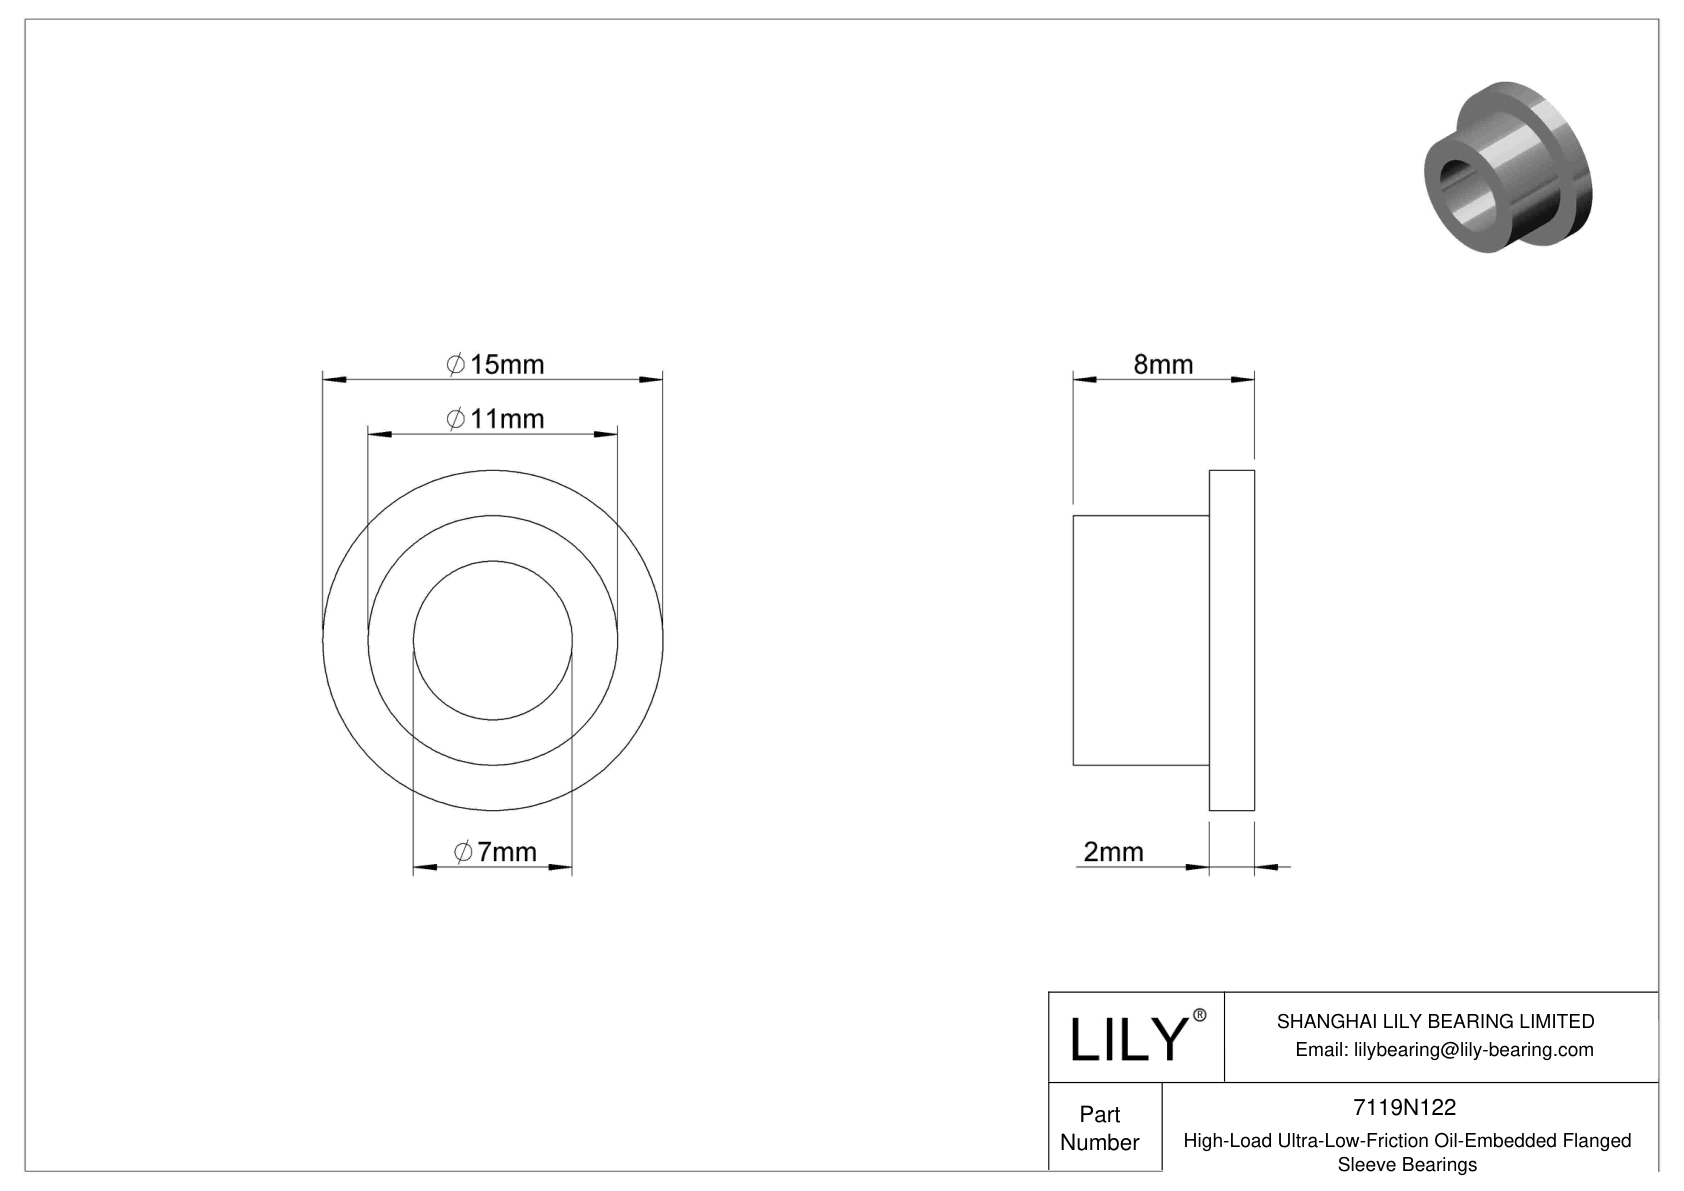 HBBJNBCC High-Load Ultra-Low-Friction Oil-Embedded Flanged Sleeve Bearings cad drawing